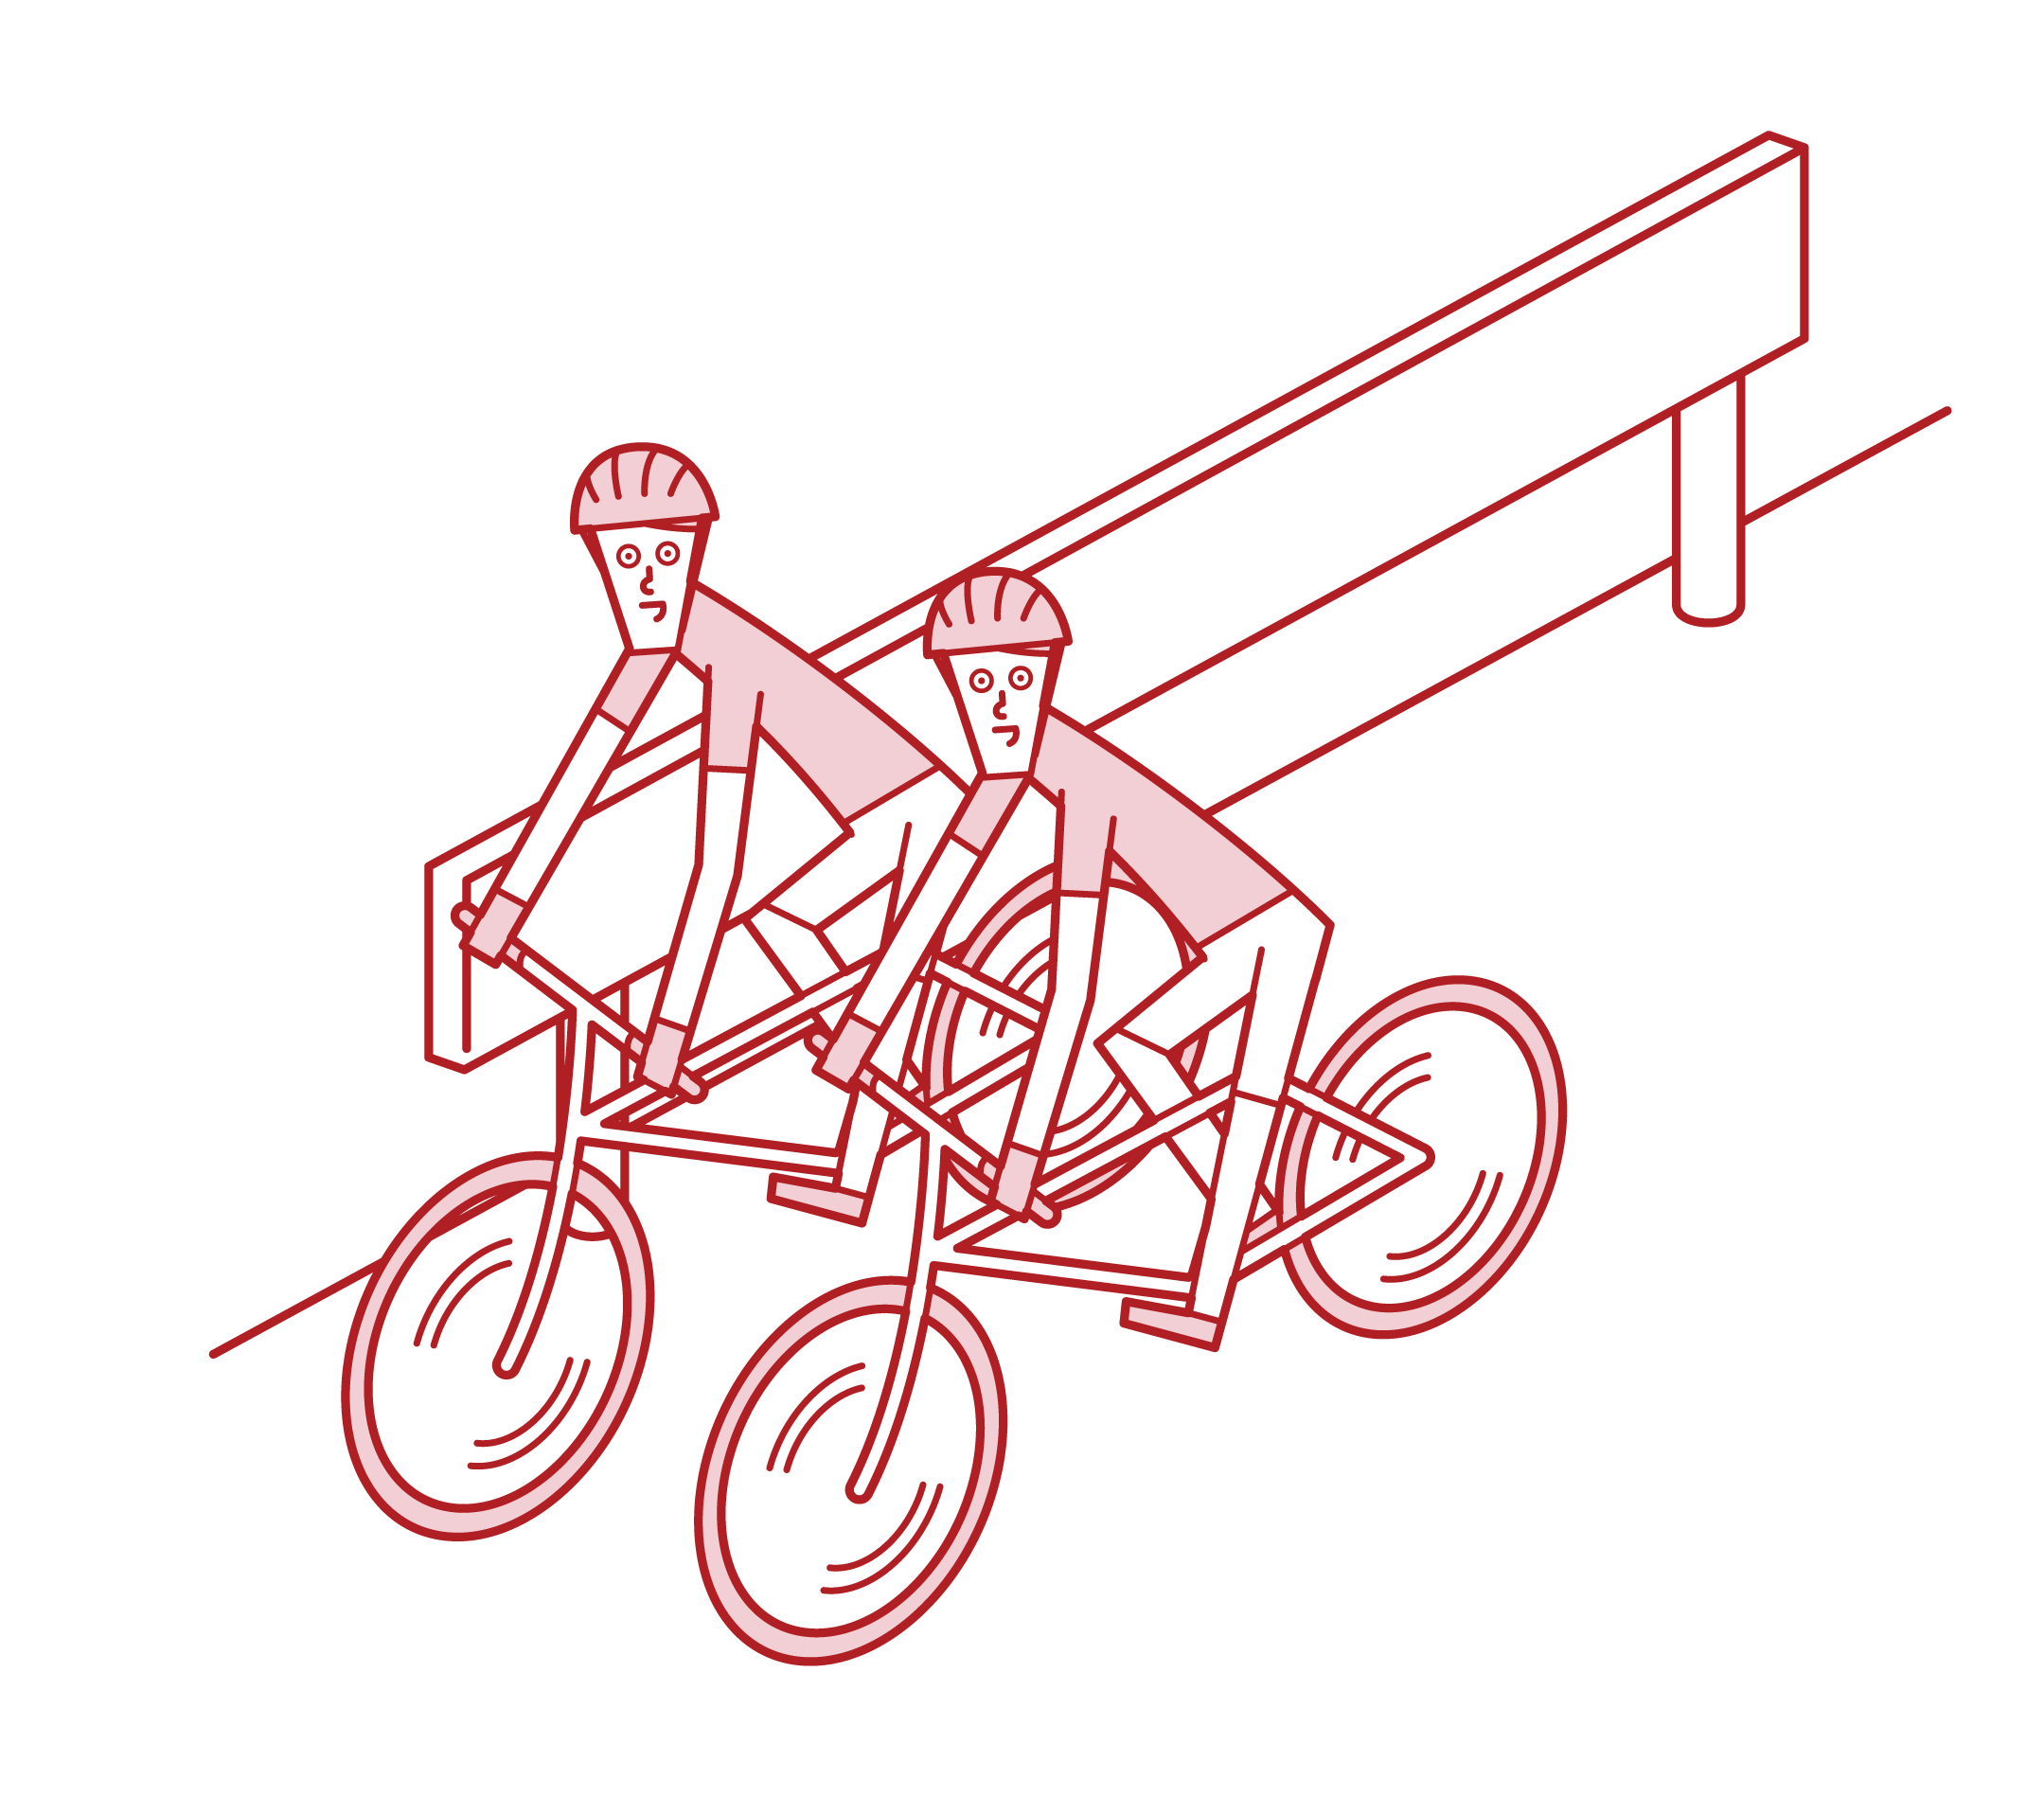 Illustration of people (men) riding bicycles